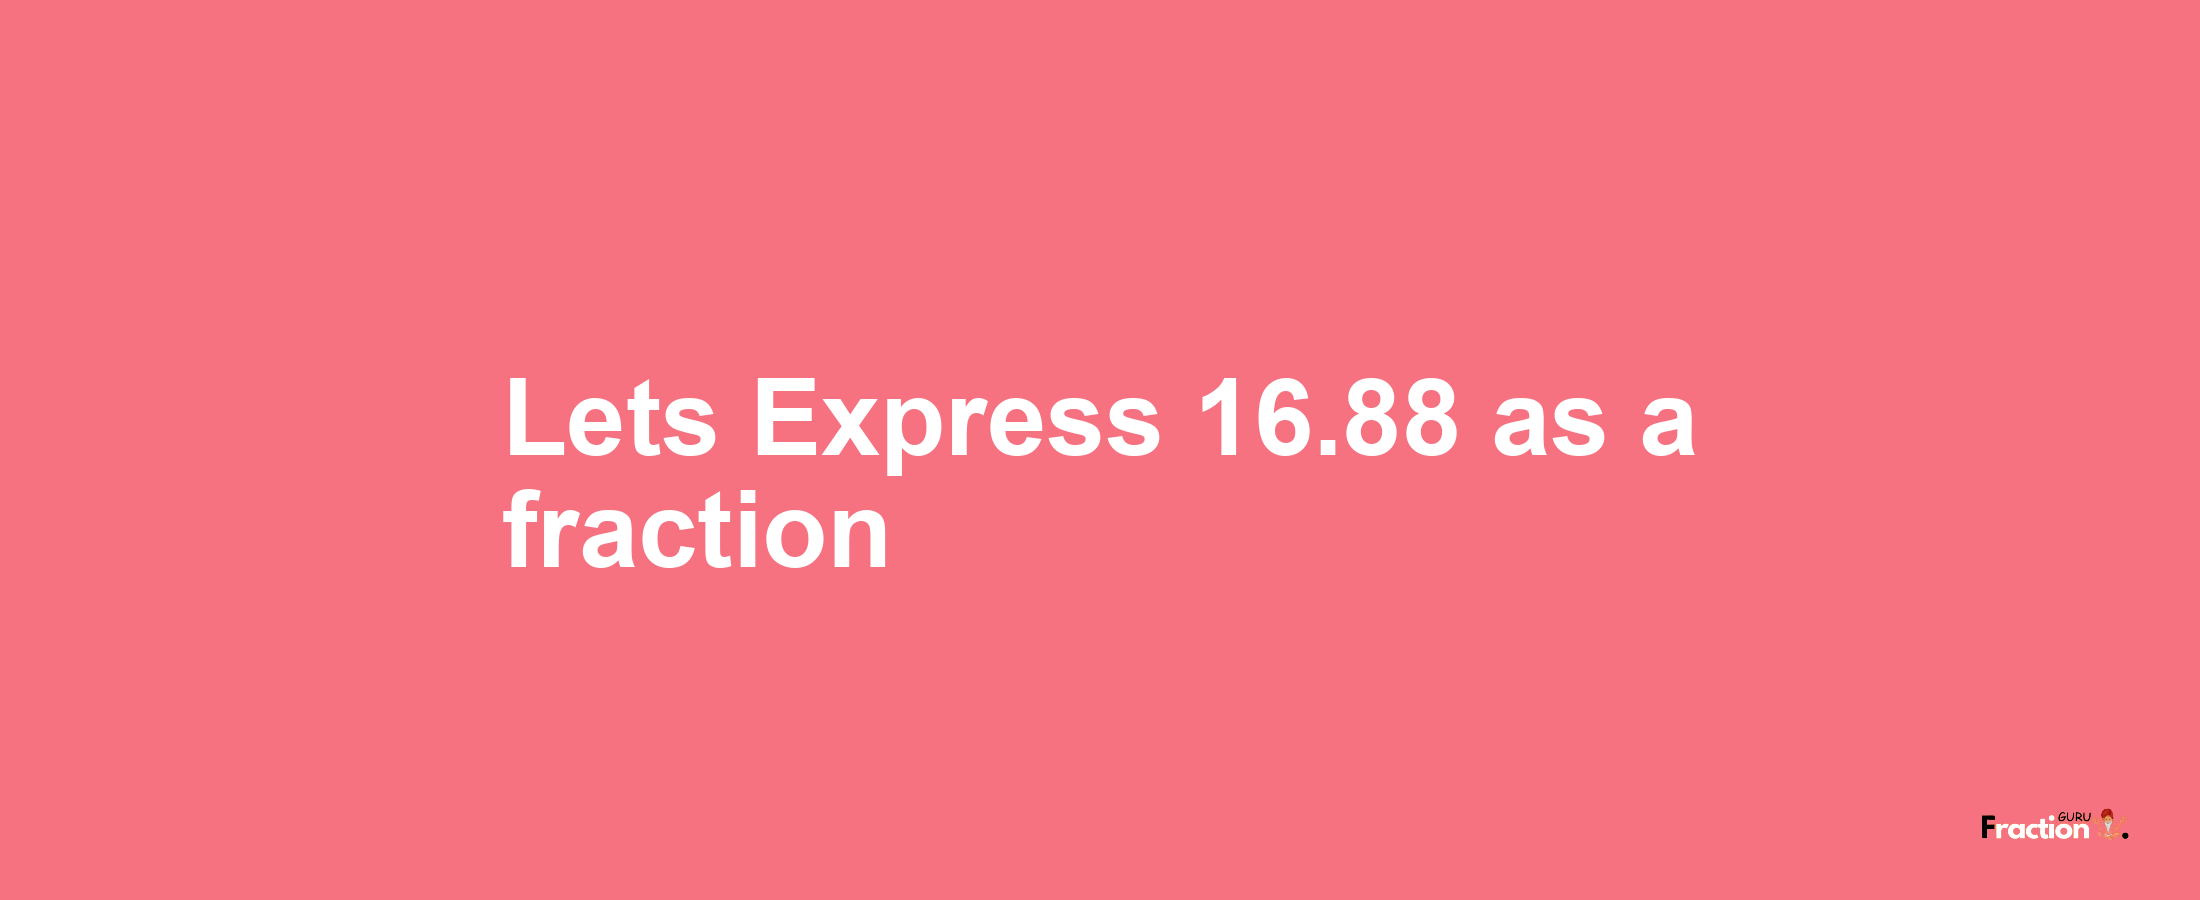 Lets Express 16.88 as afraction